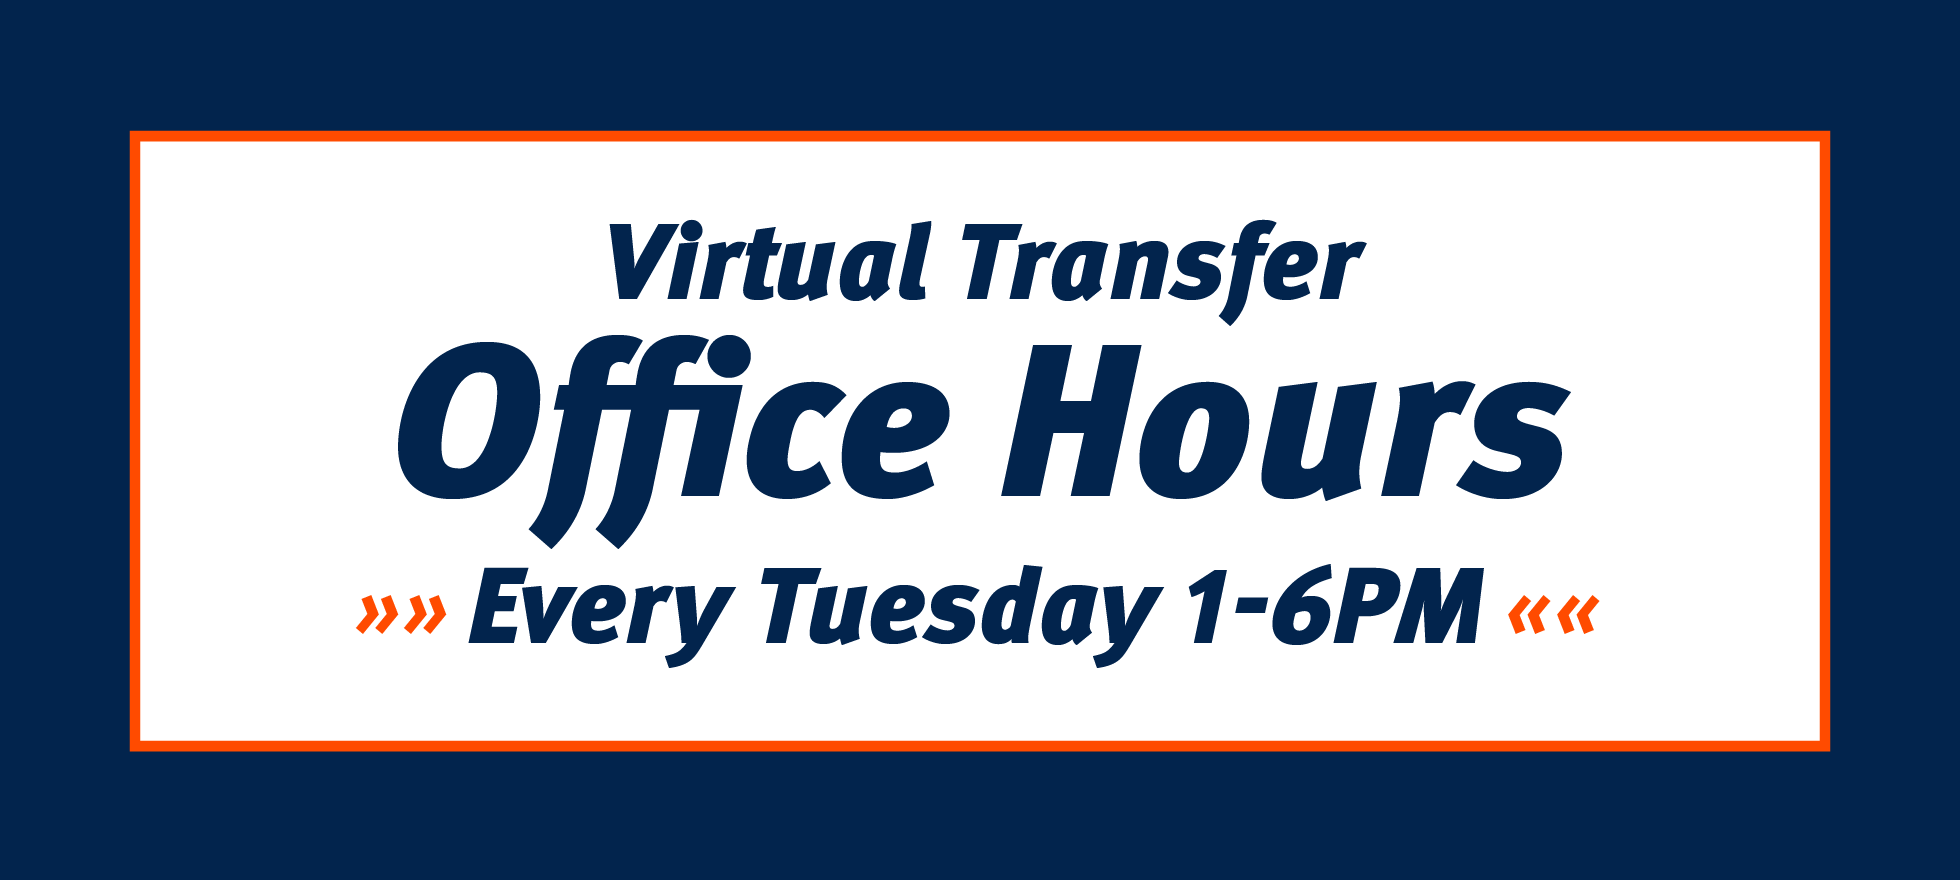 Virtual Transfer Office Hours Every Tuesday 1-6 pm